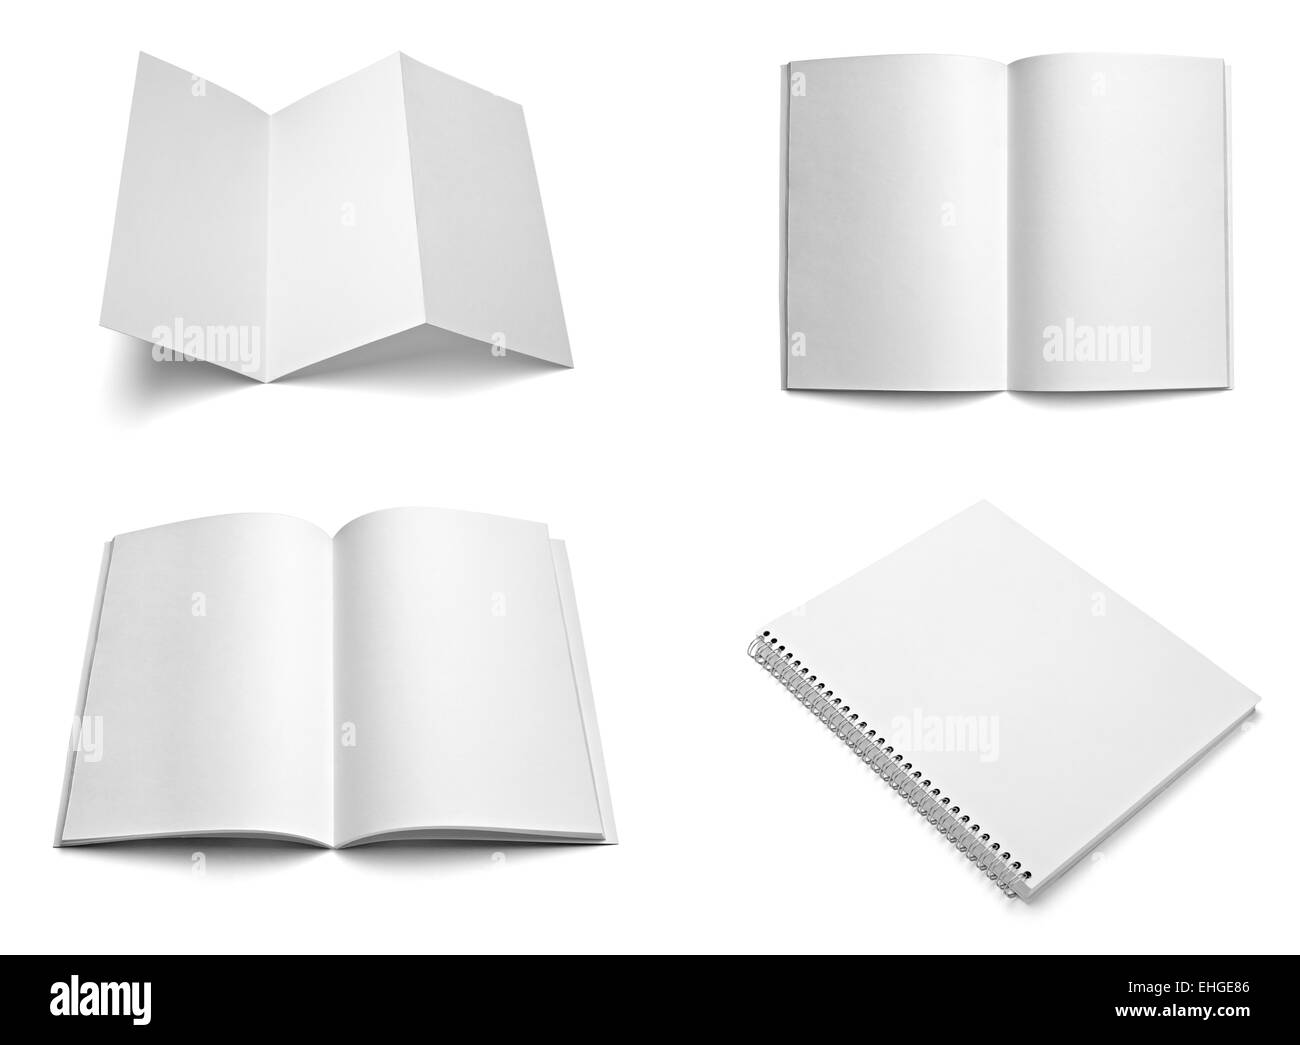 leaflet notebook textbook white blank paper template Stock Photo